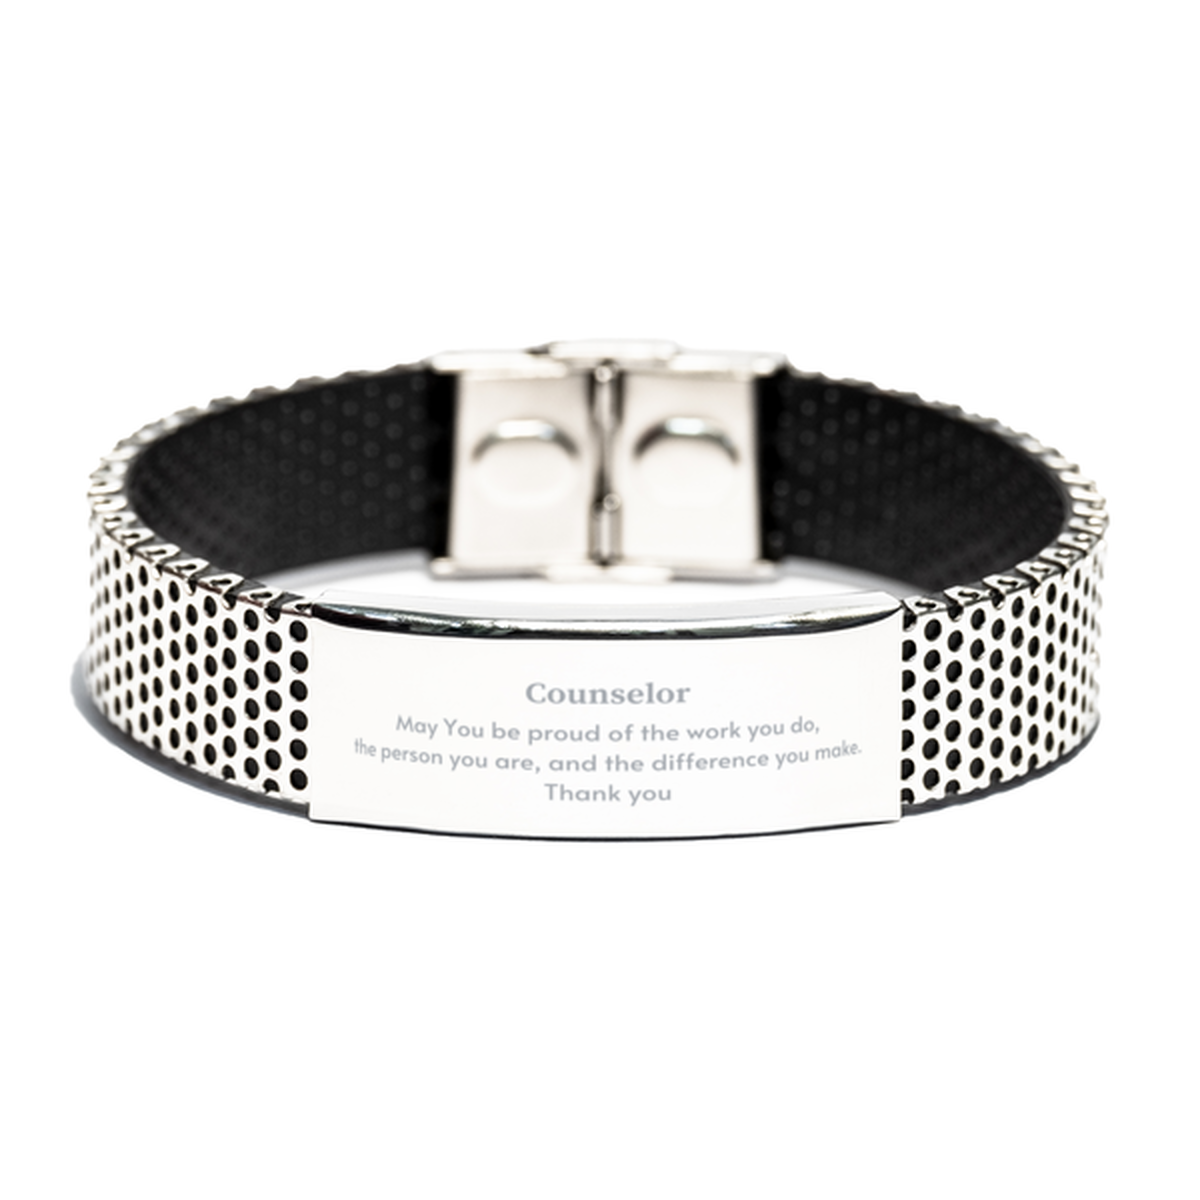 Heartwarming Stainless Steel Bracelet Retirement Coworkers Gifts for Counselor, Counselor May You be proud of the work you do, the person you are Gifts for Boss Men Women Friends